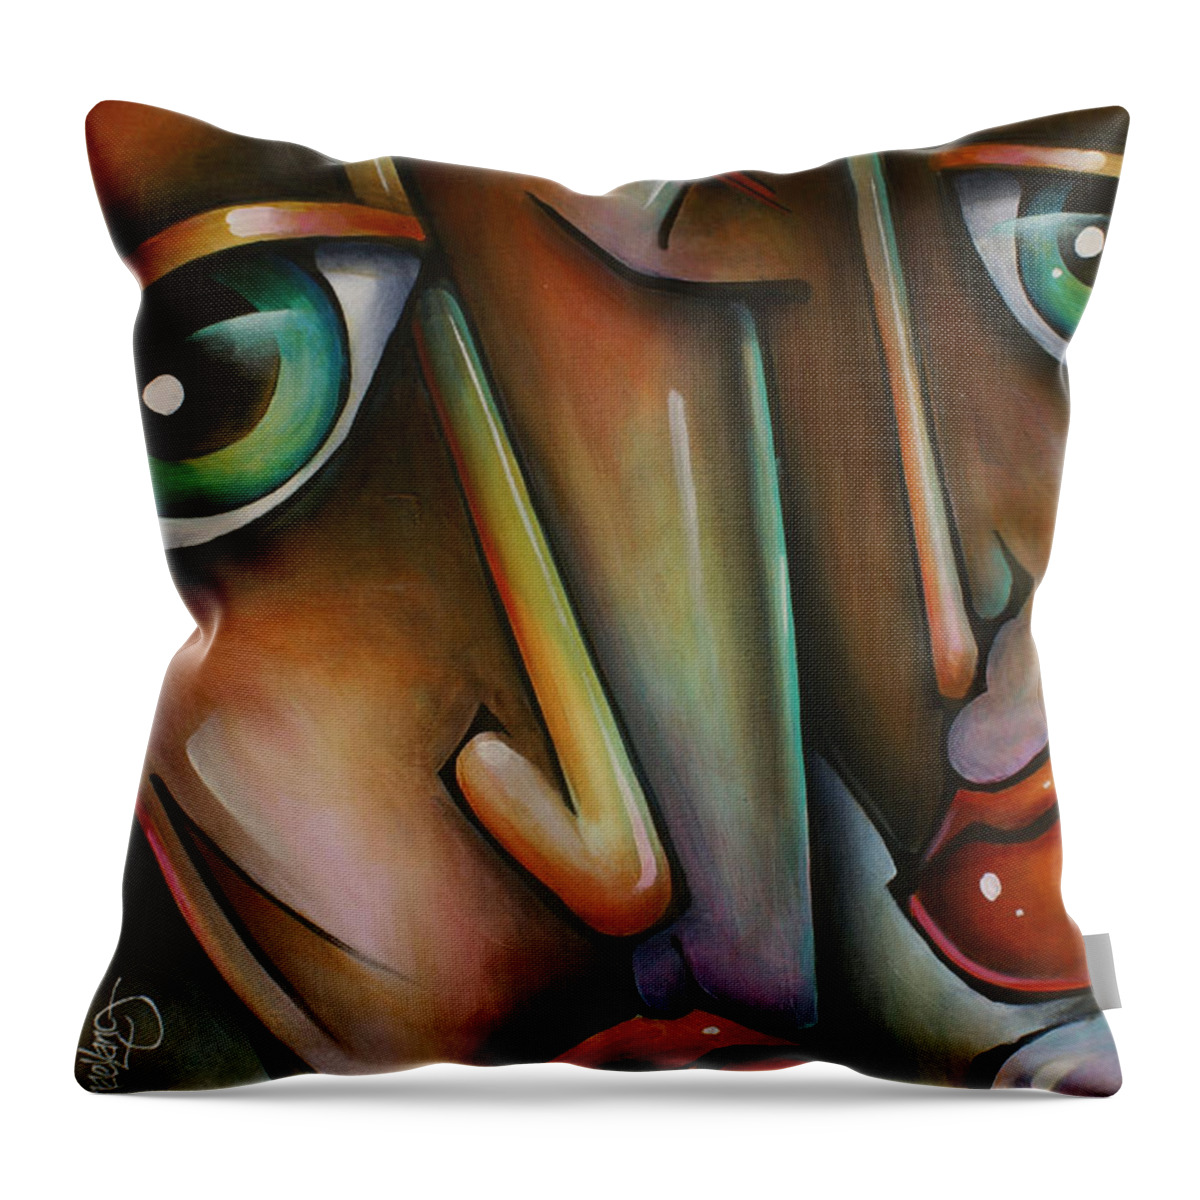 Portrait Throw Pillow featuring the painting 'Together' by Michael Lang